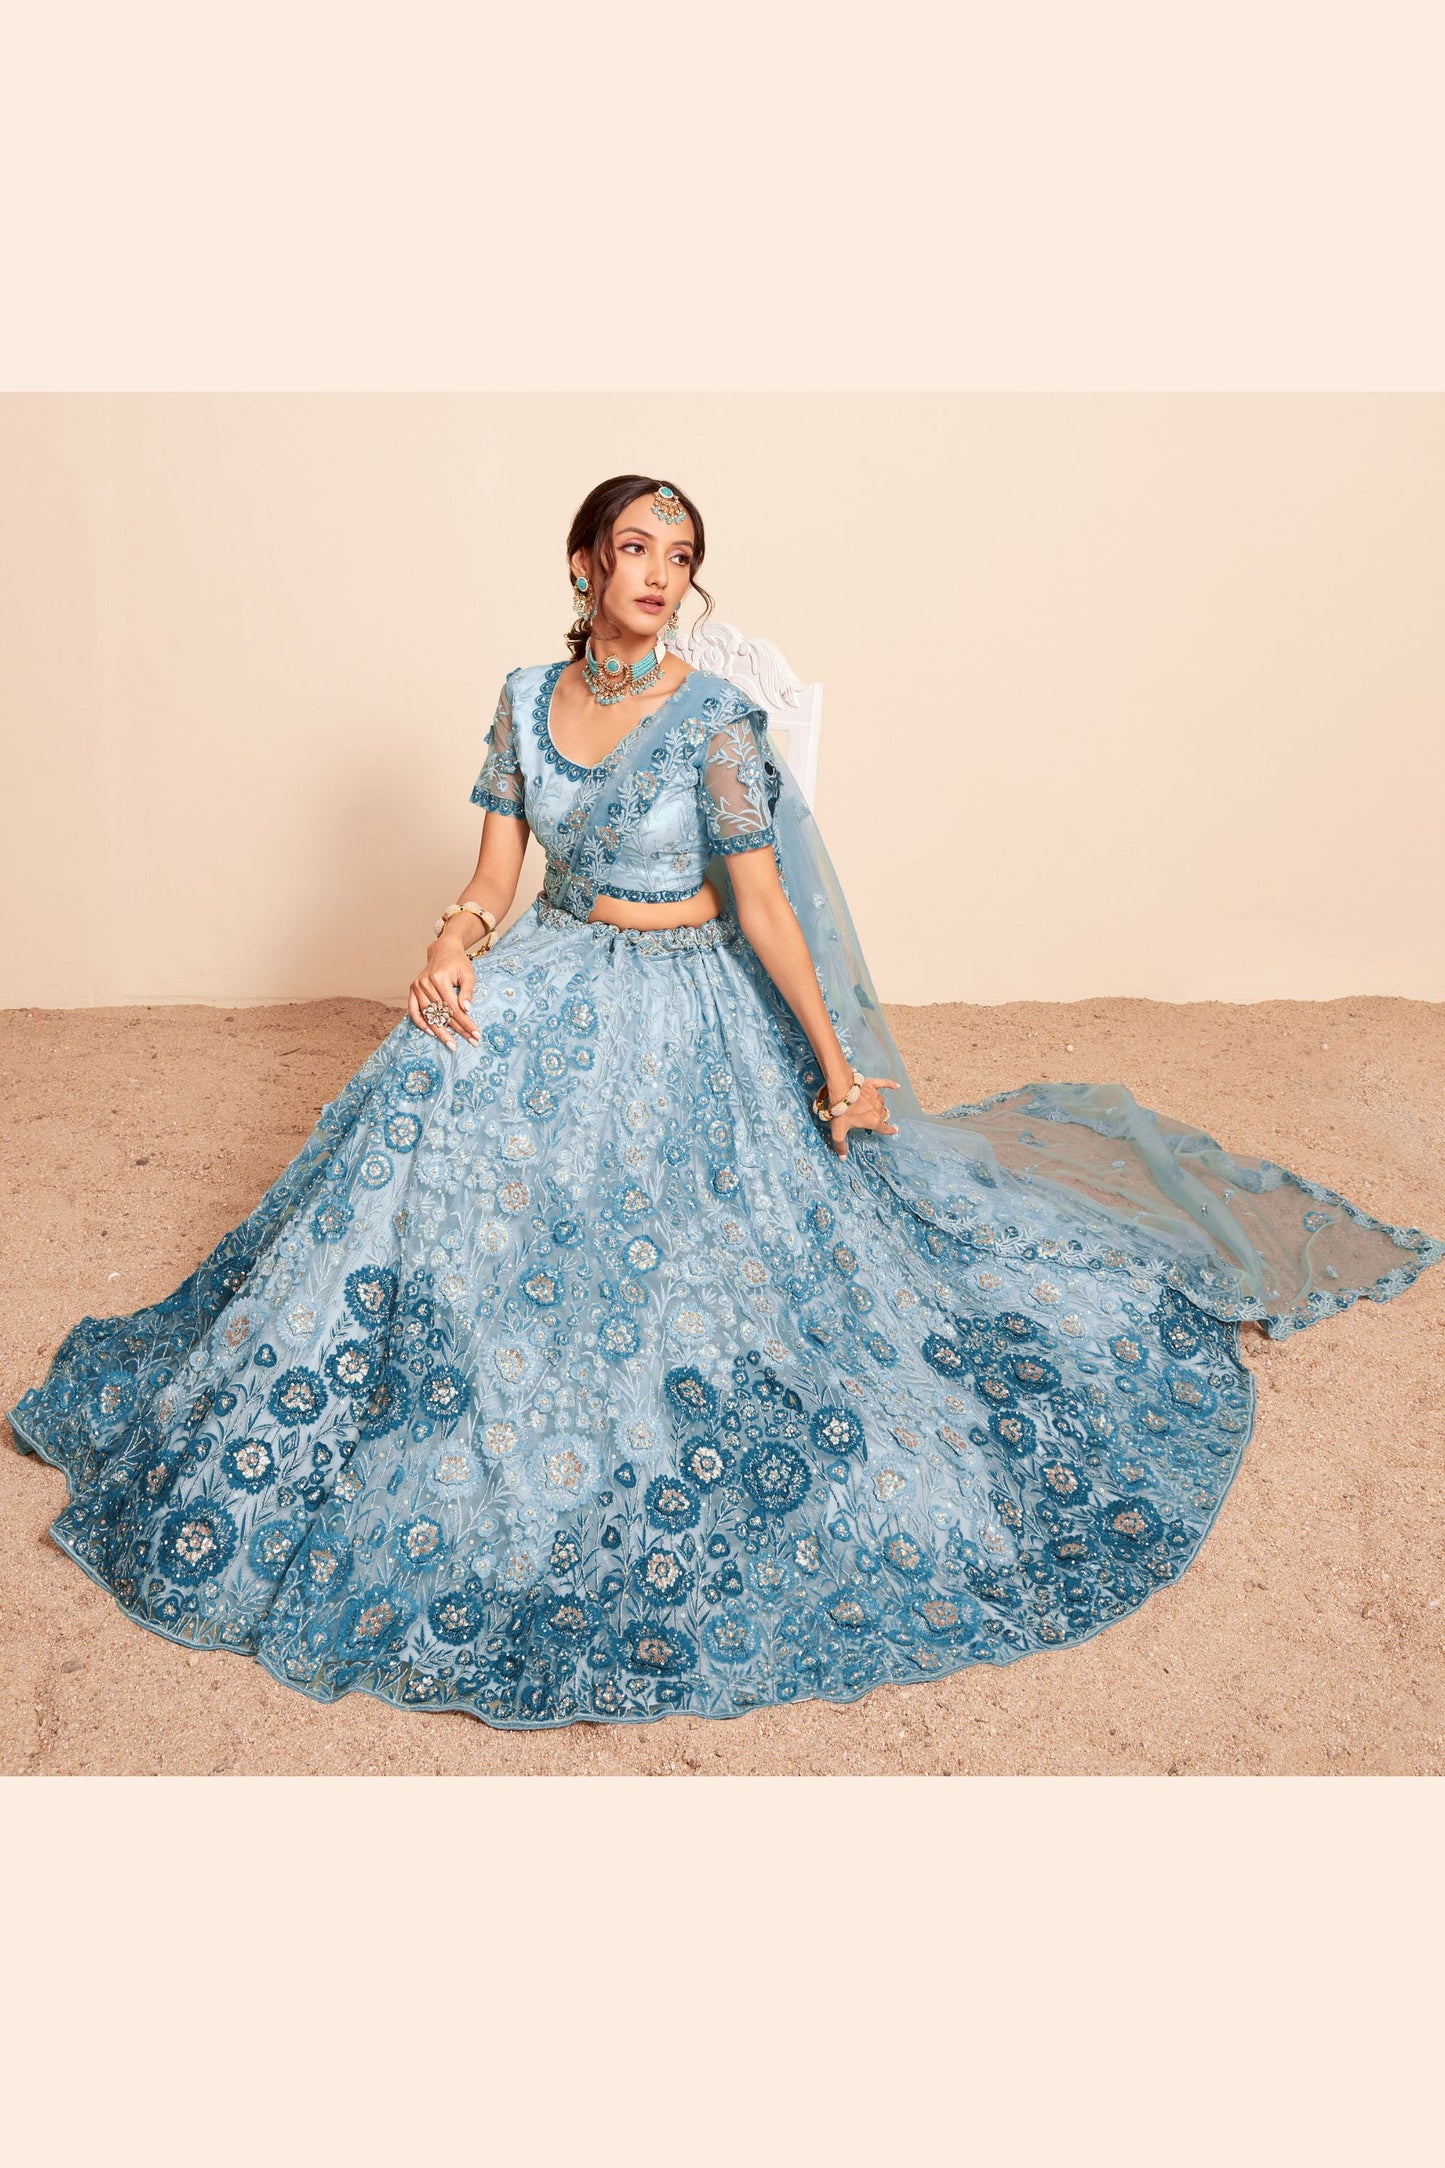 Turquoise Net Embroidered Floral Lehenga Choli For Indian Festivals & Weddings - Thread & Sequence Embroidery Work, Zari Work, Zarkan Work, Hand Embellishment Work